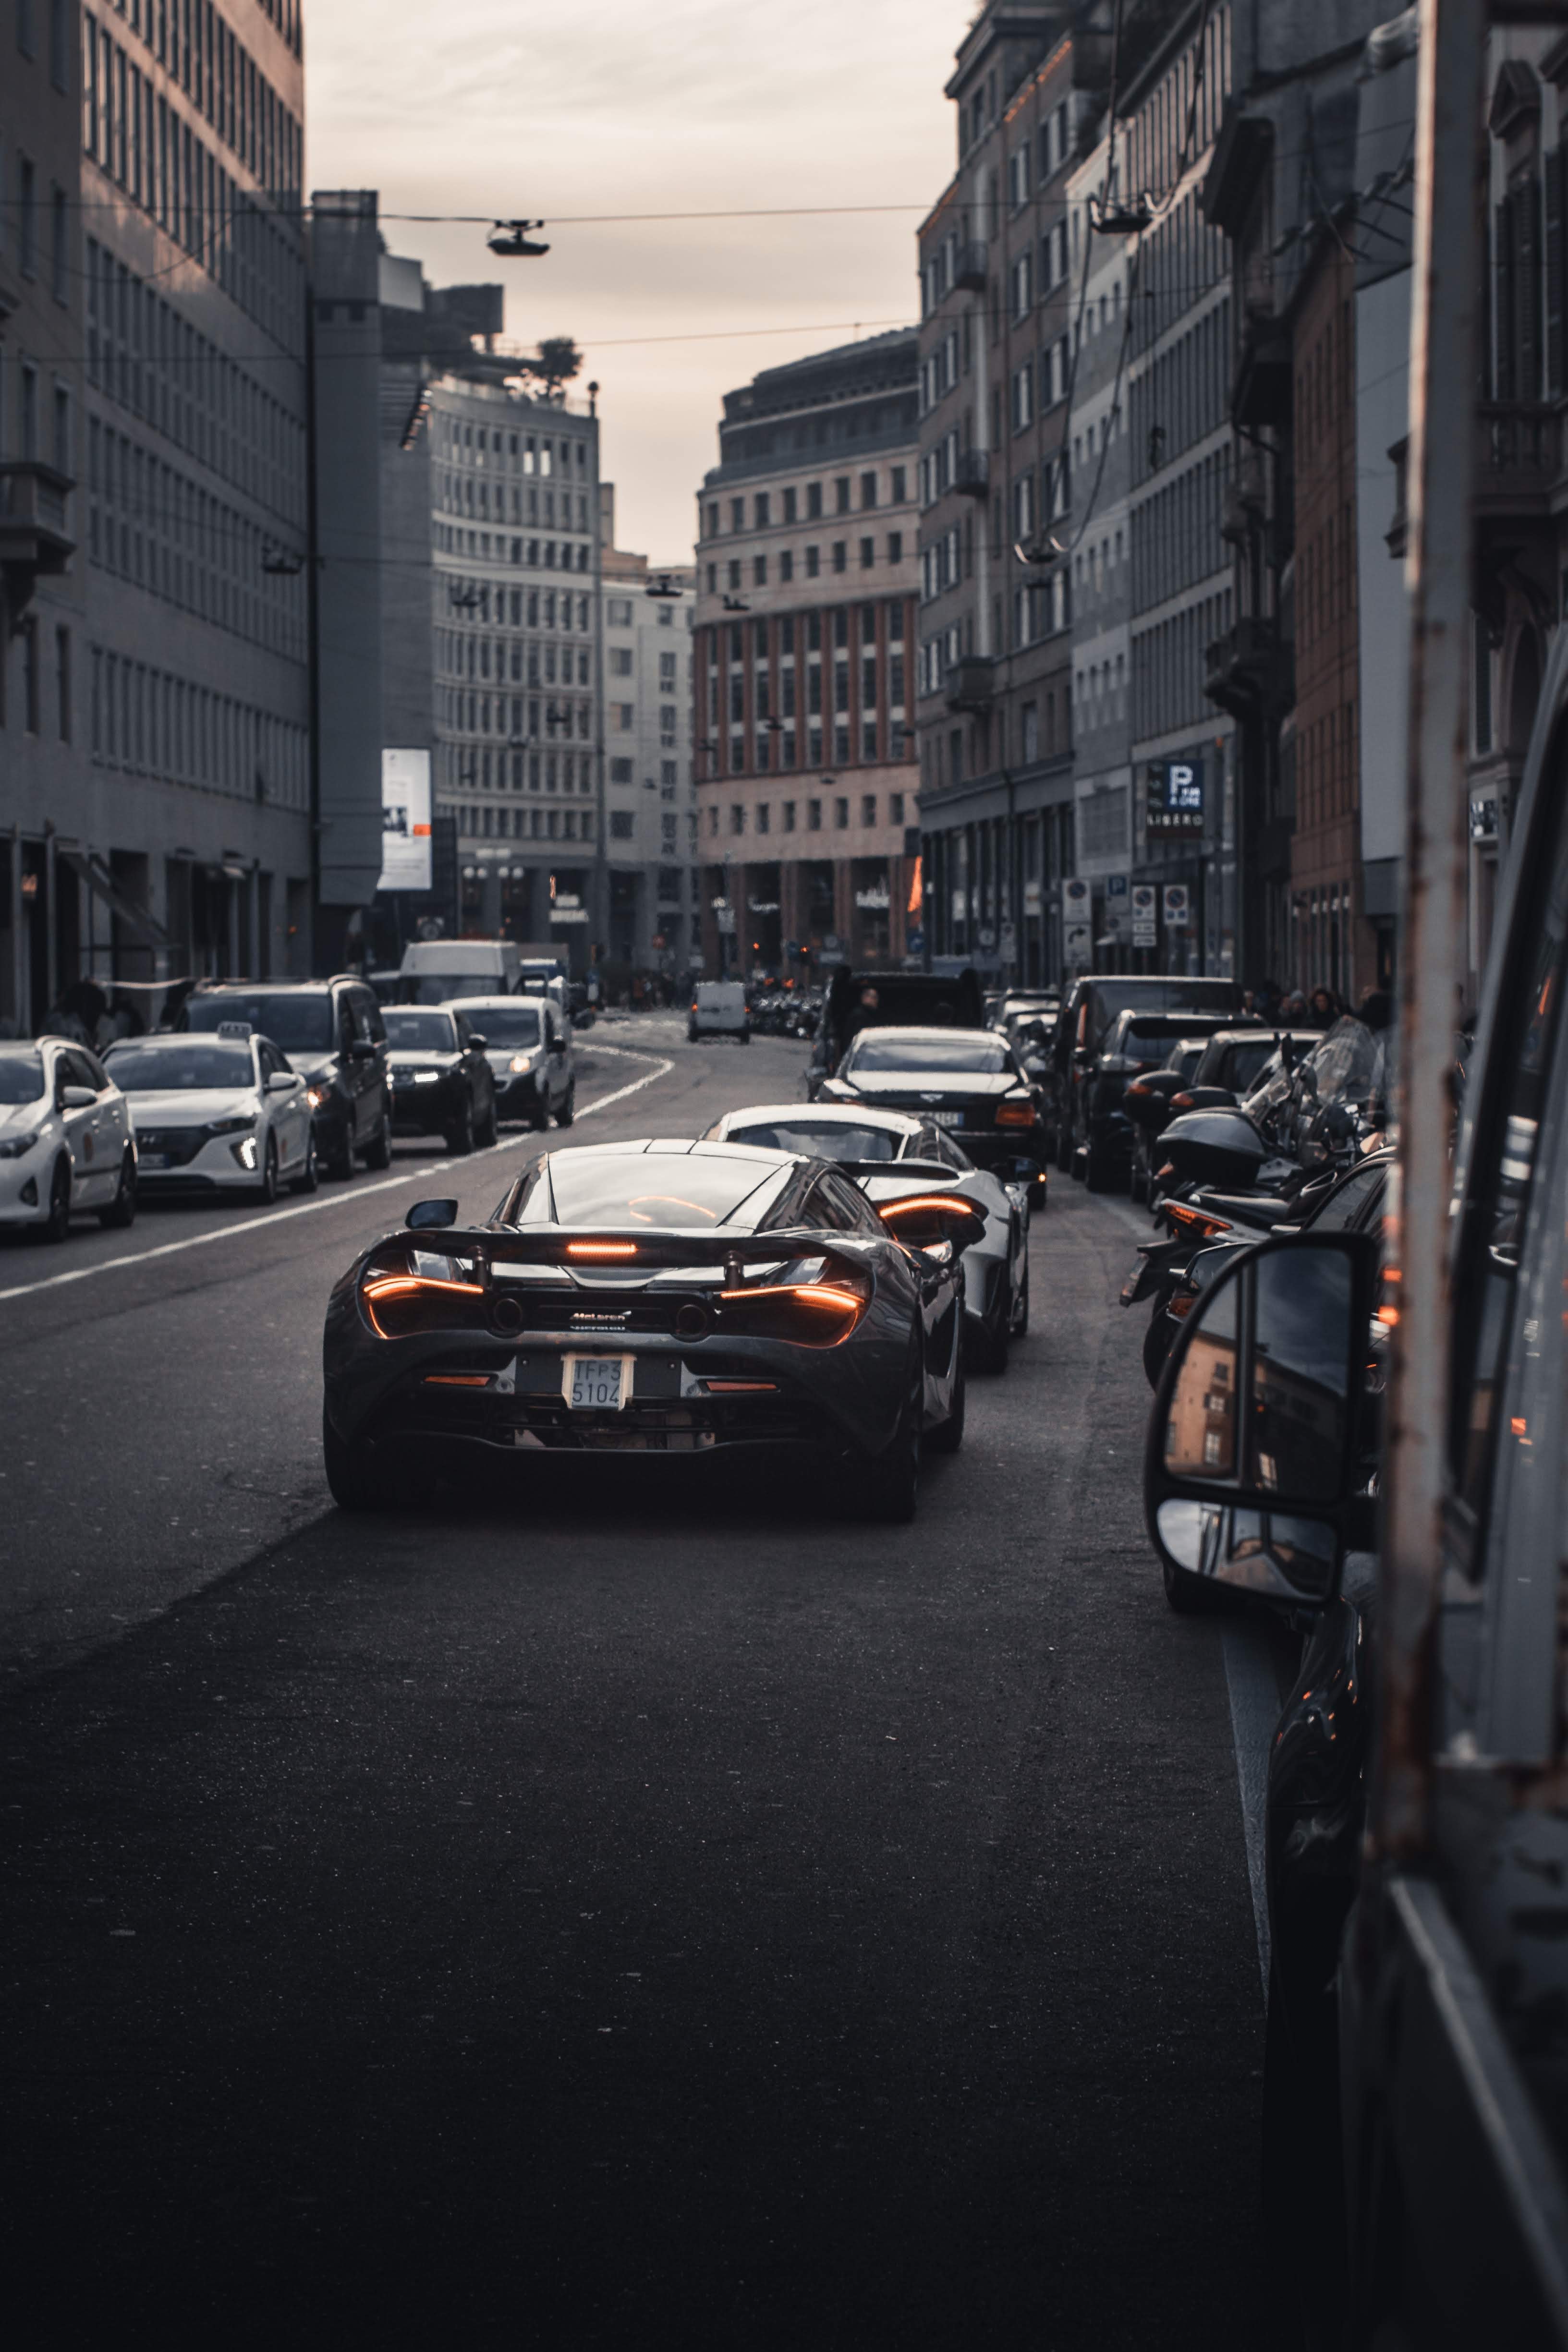 rear view, back view, cars, city, road, street